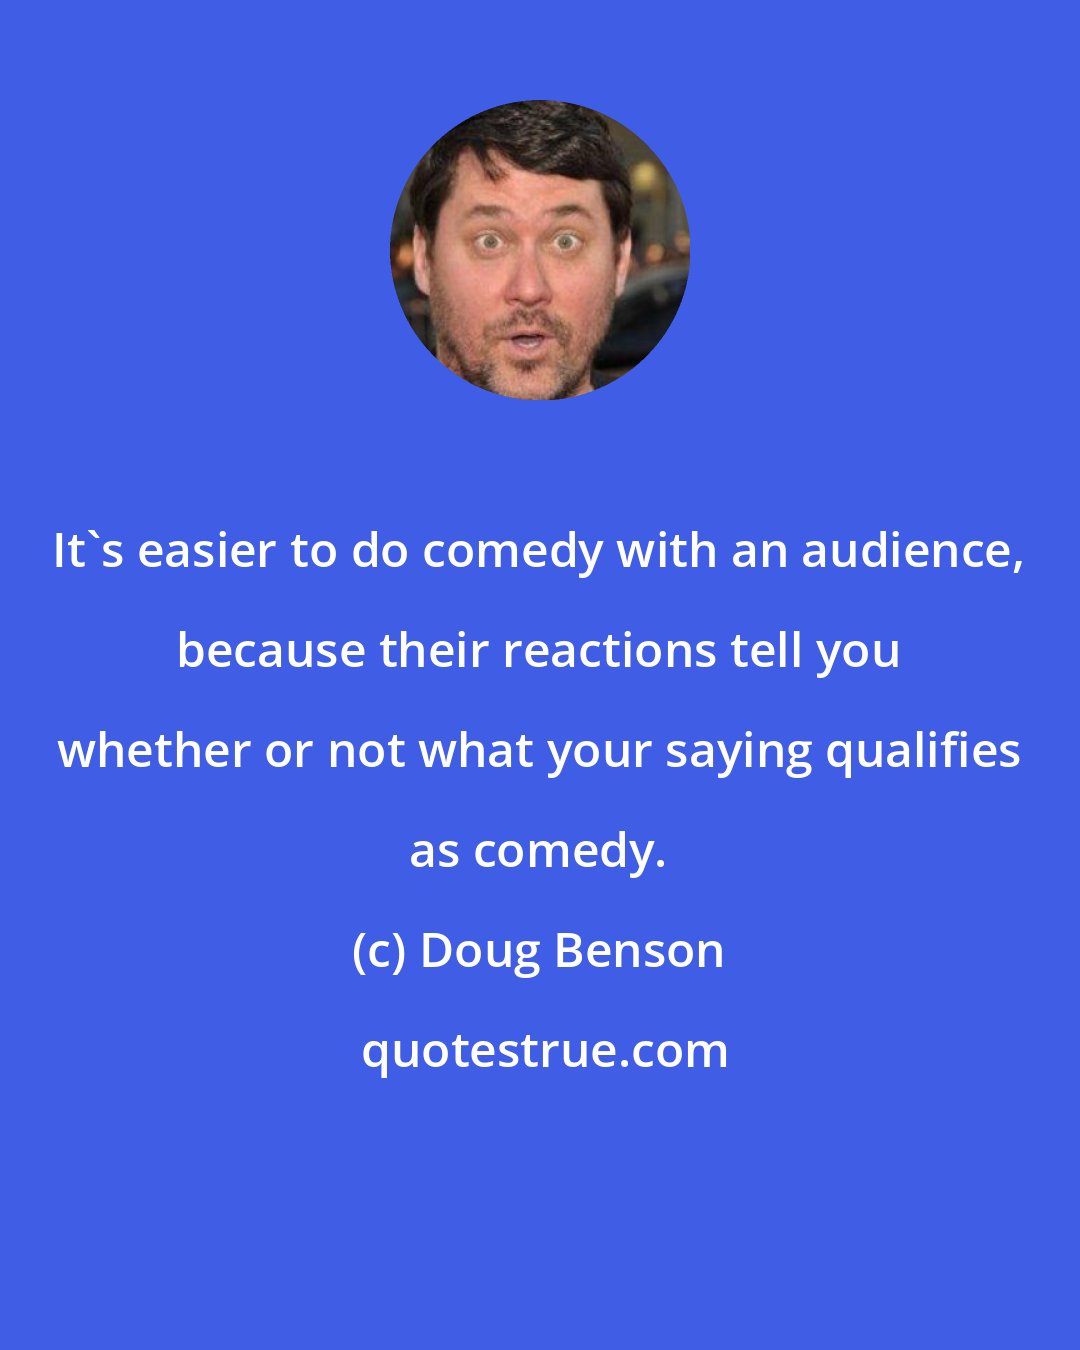 Doug Benson: It's easier to do comedy with an audience, because their reactions tell you whether or not what your saying qualifies as comedy.